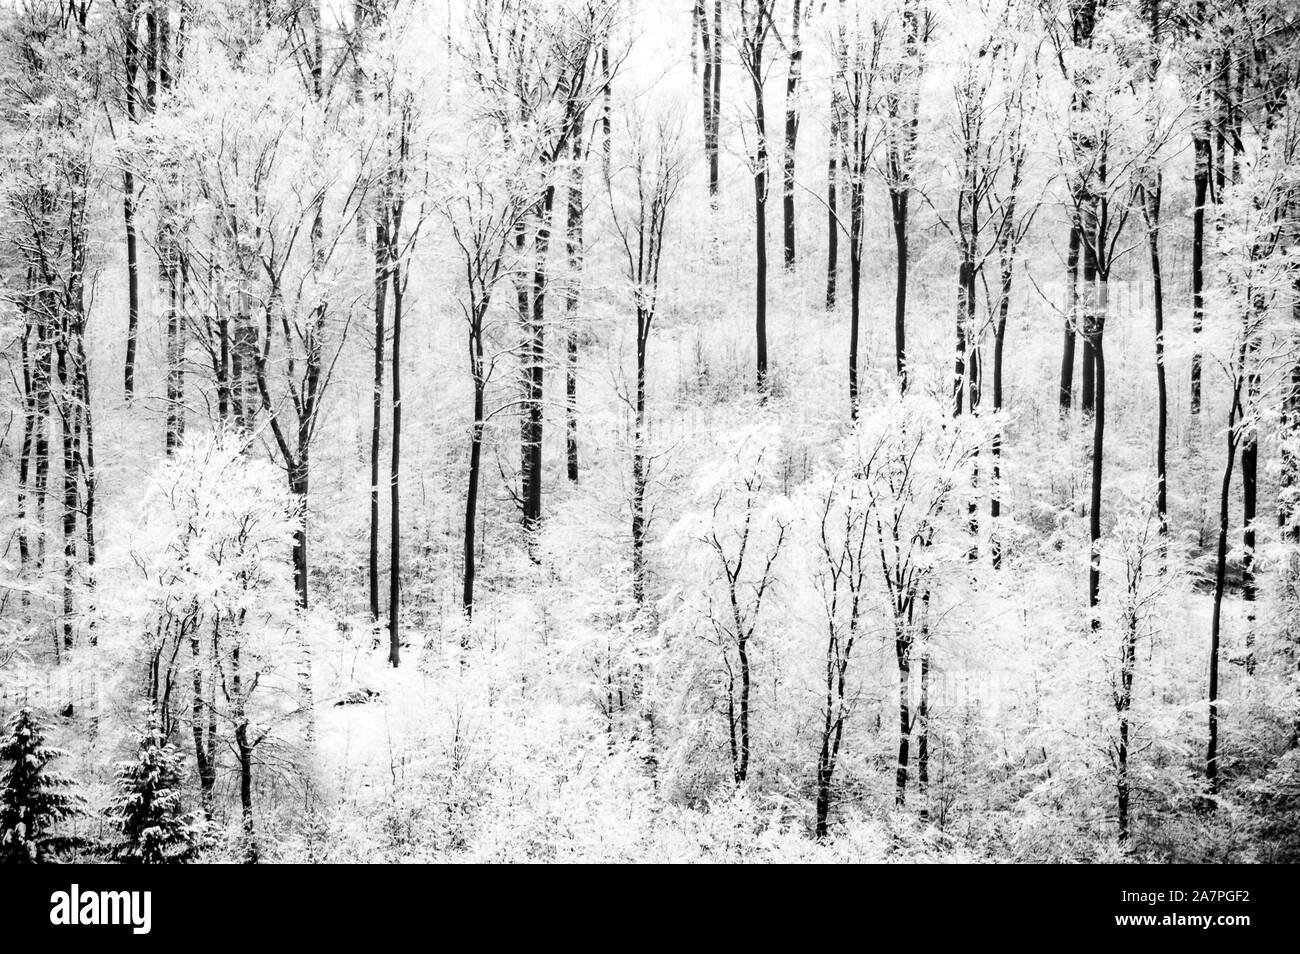 Foggy winter snowy trees in forest Stock Photo